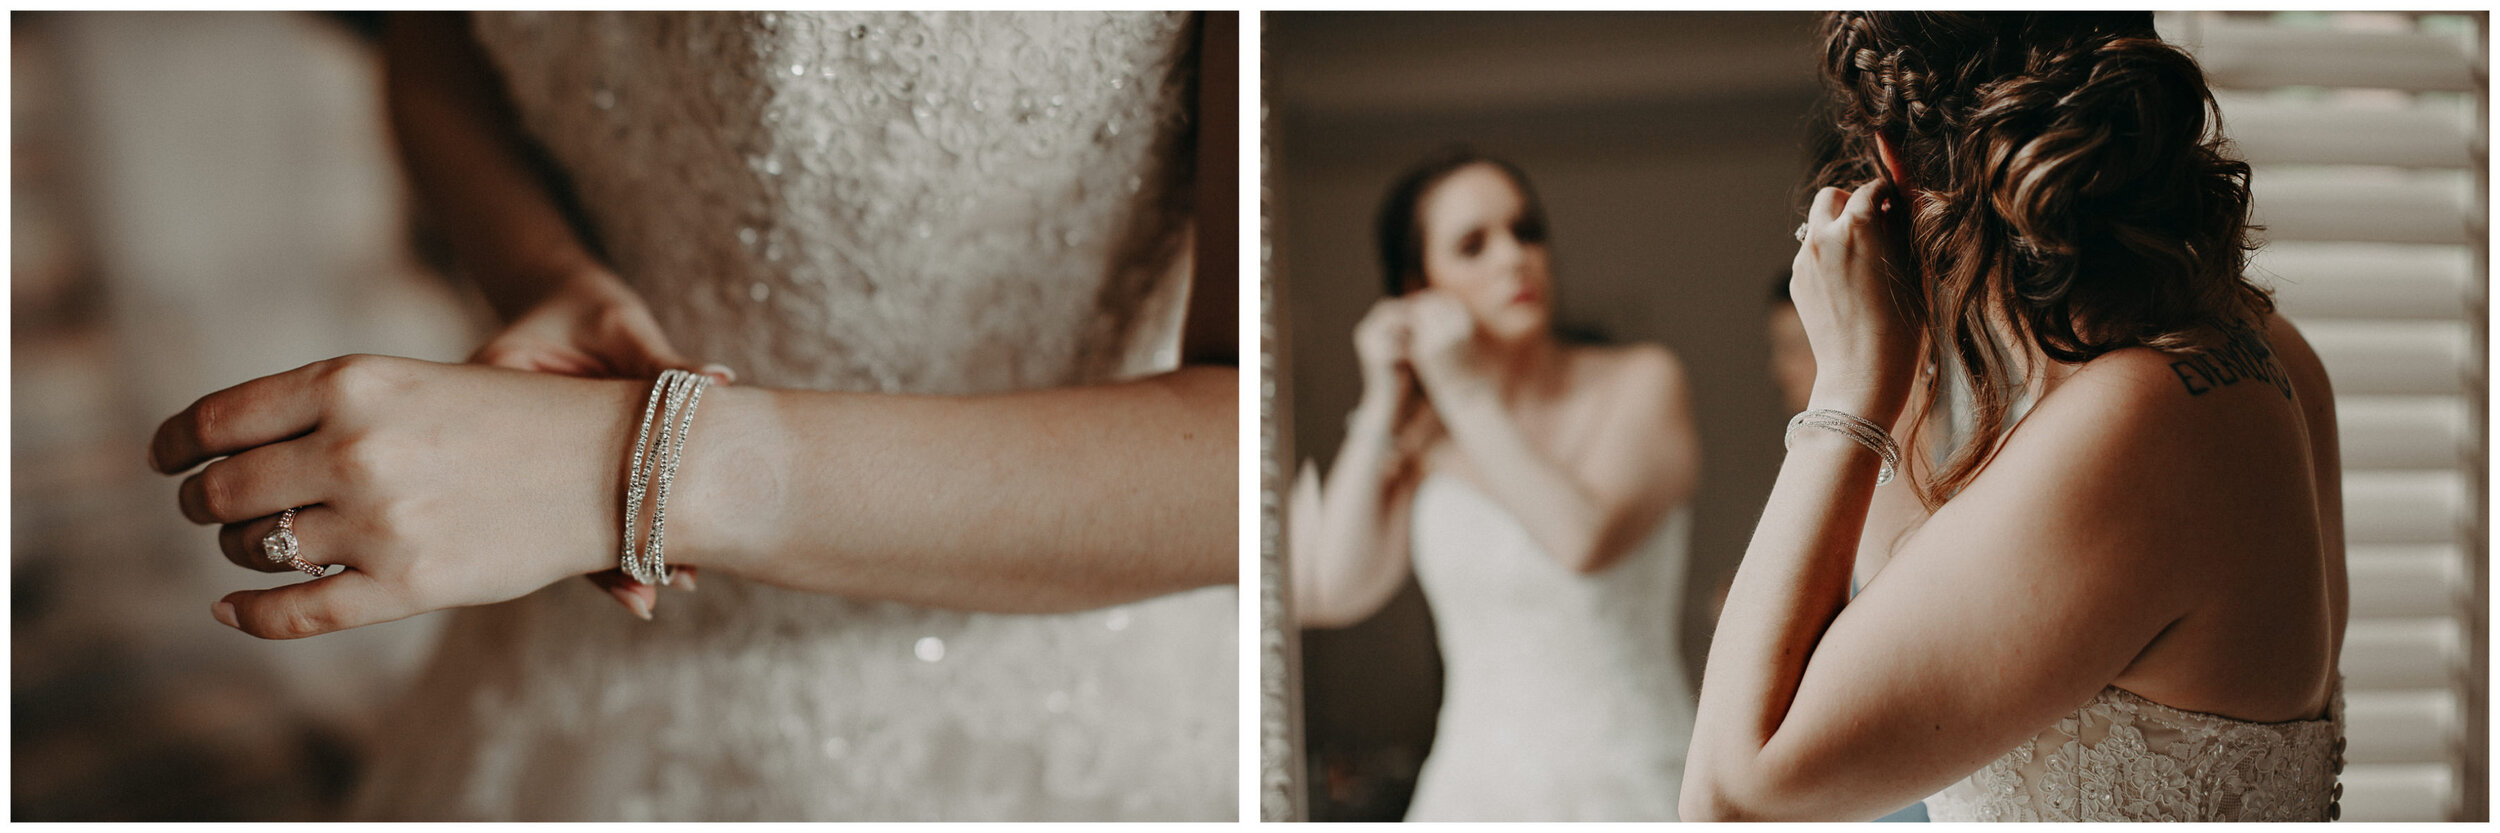 Christa & Ben's Wedding Day || Atlanta Spring Wedding at The Country Club of The South13.jpg